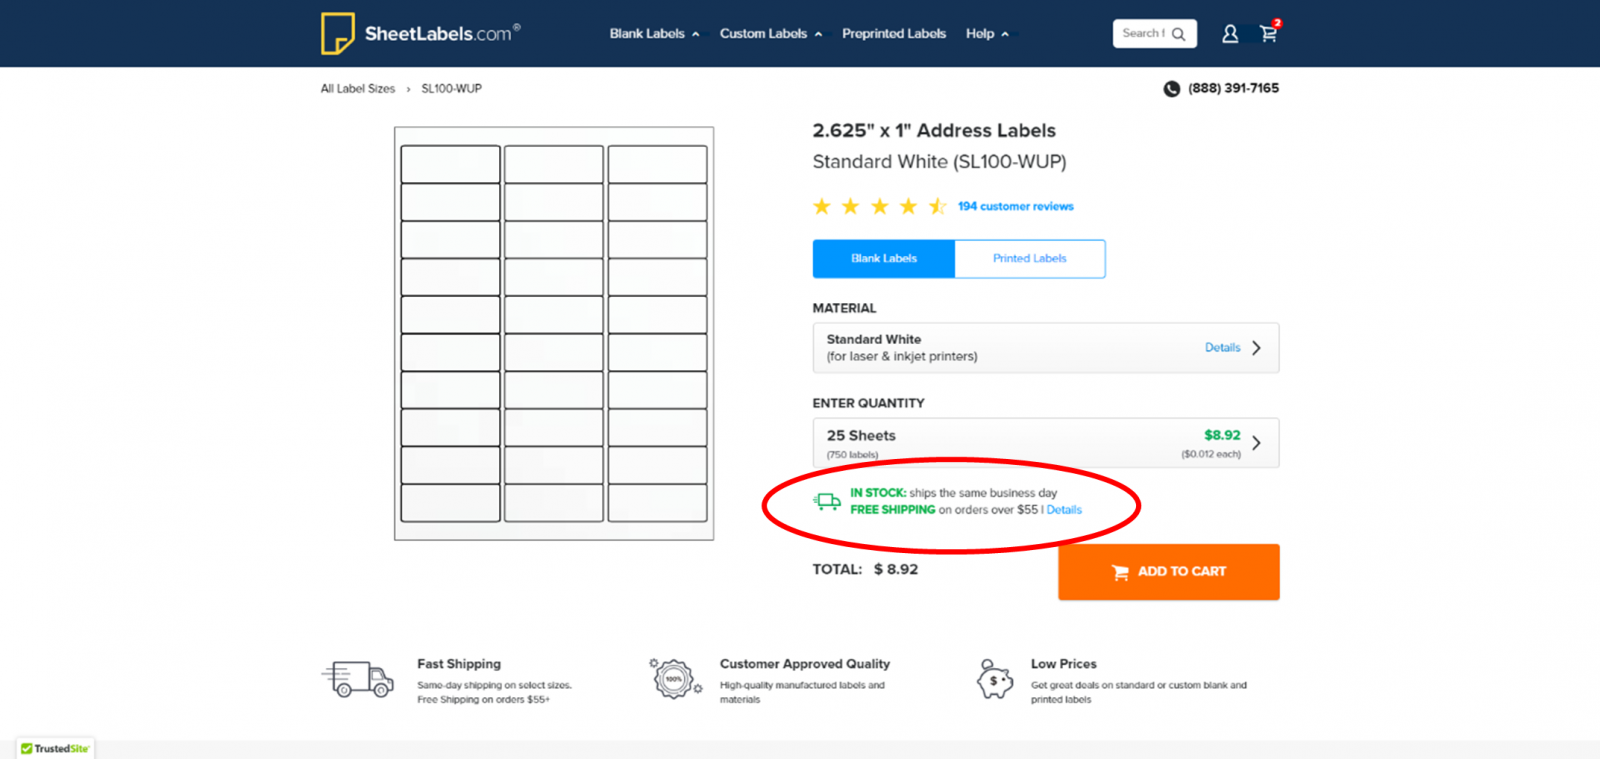 Shipping estimate shown on product page